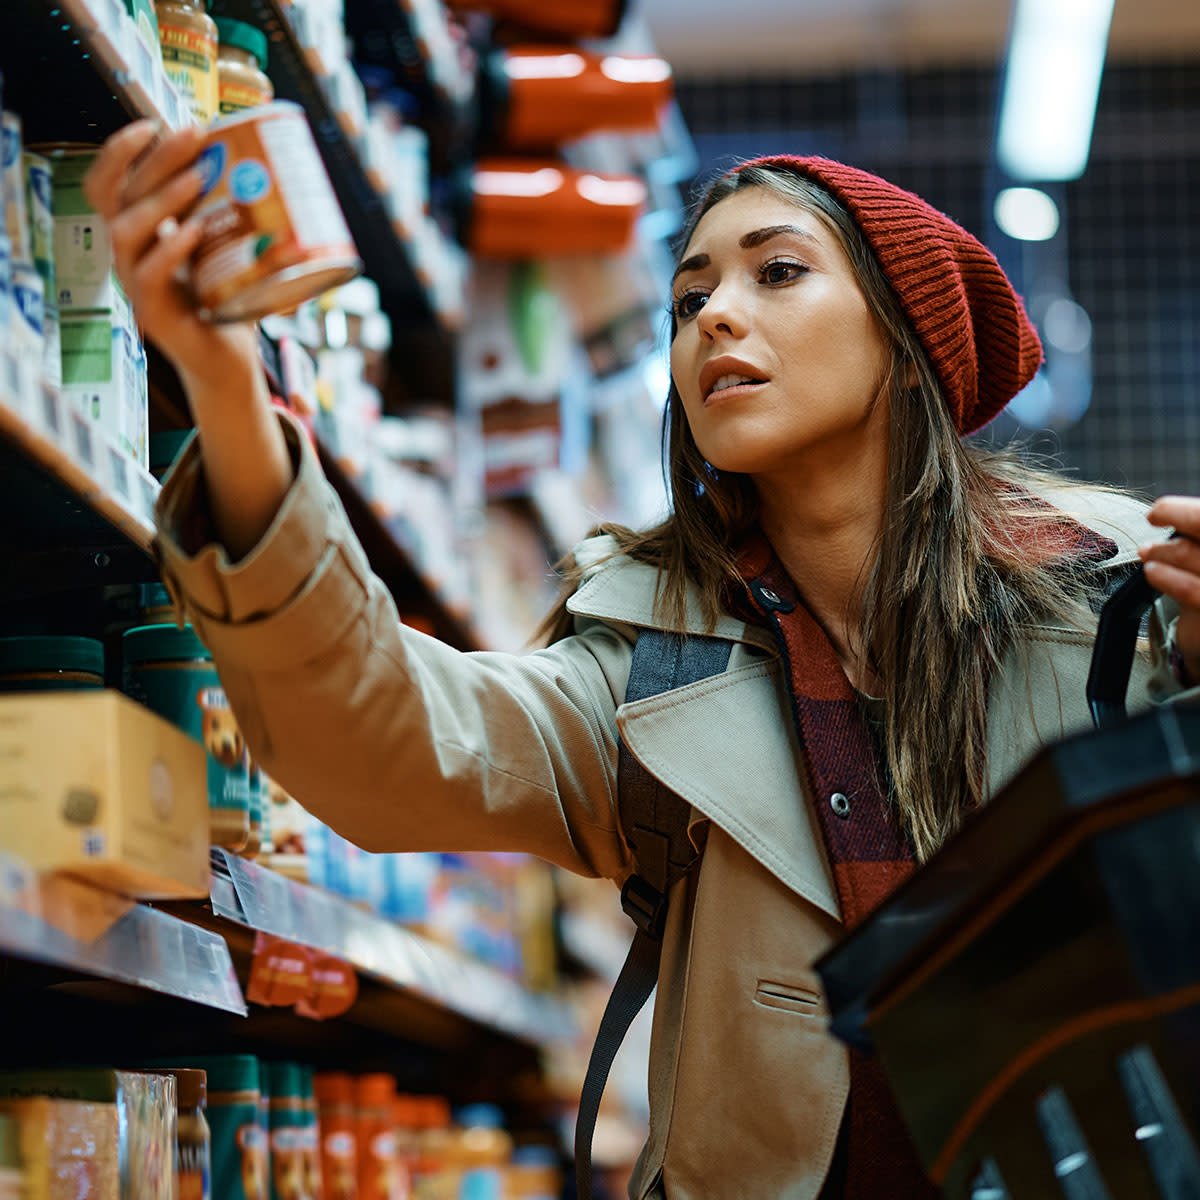 woman buying canned good at grocery store